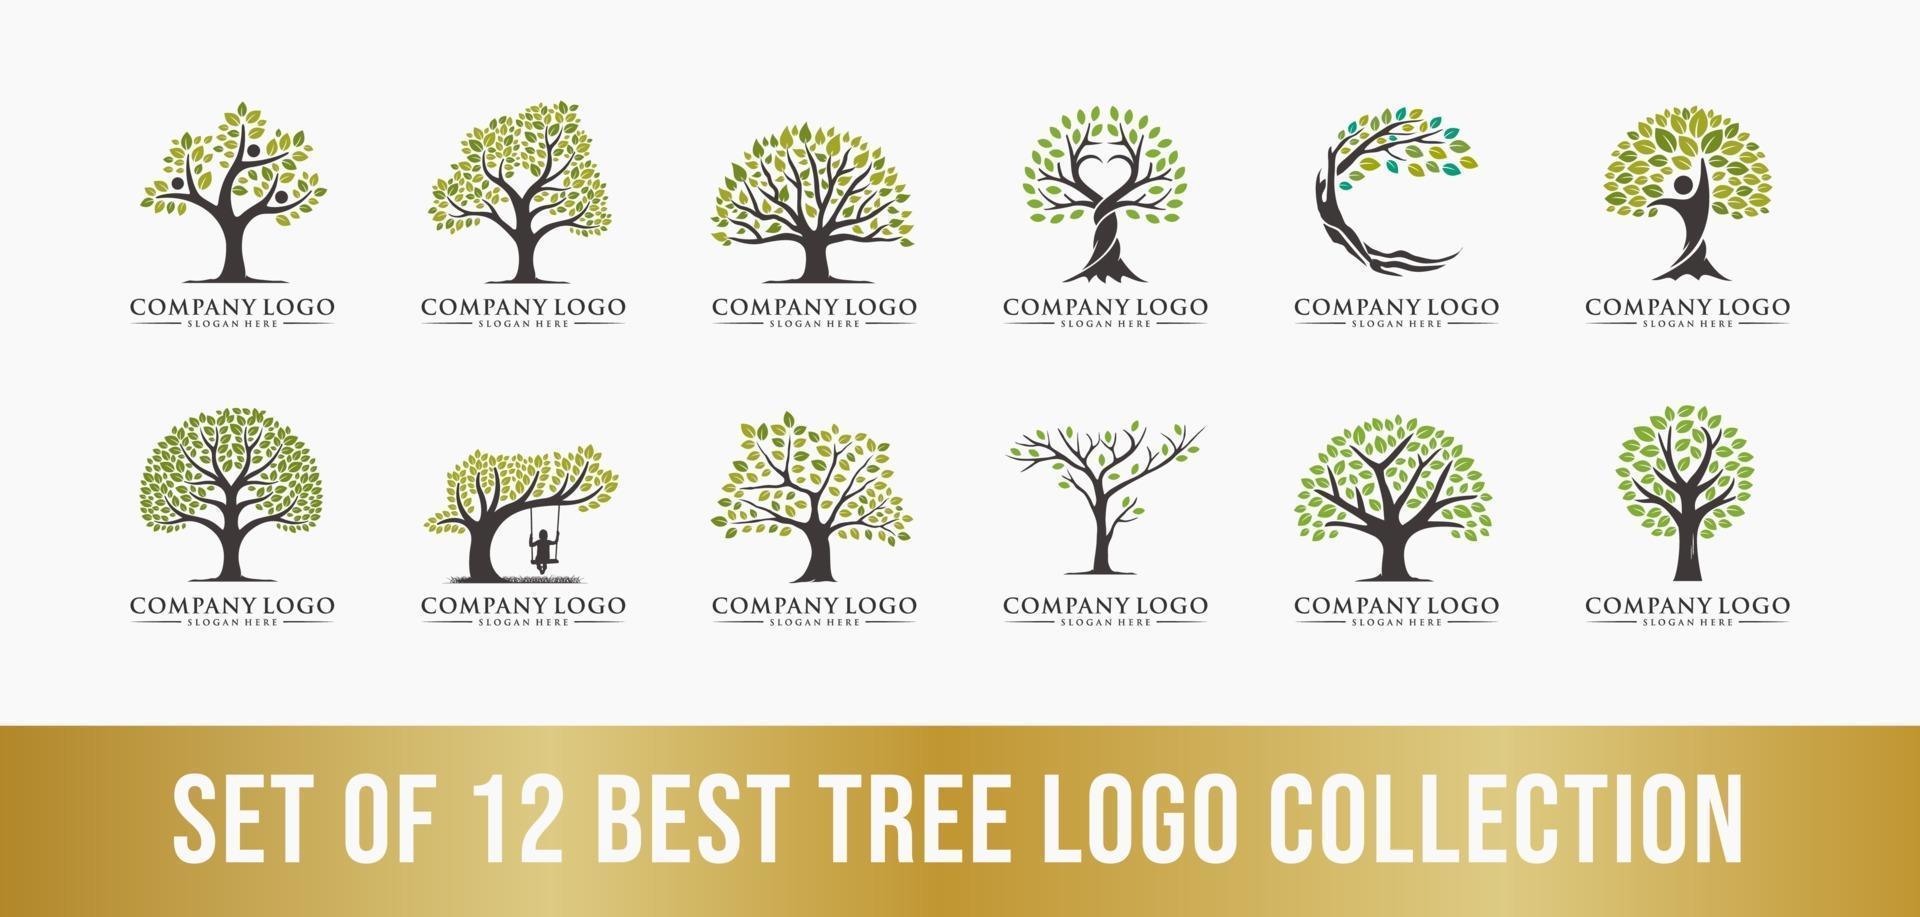 best tree logo collection set, perfect for company logos. vector